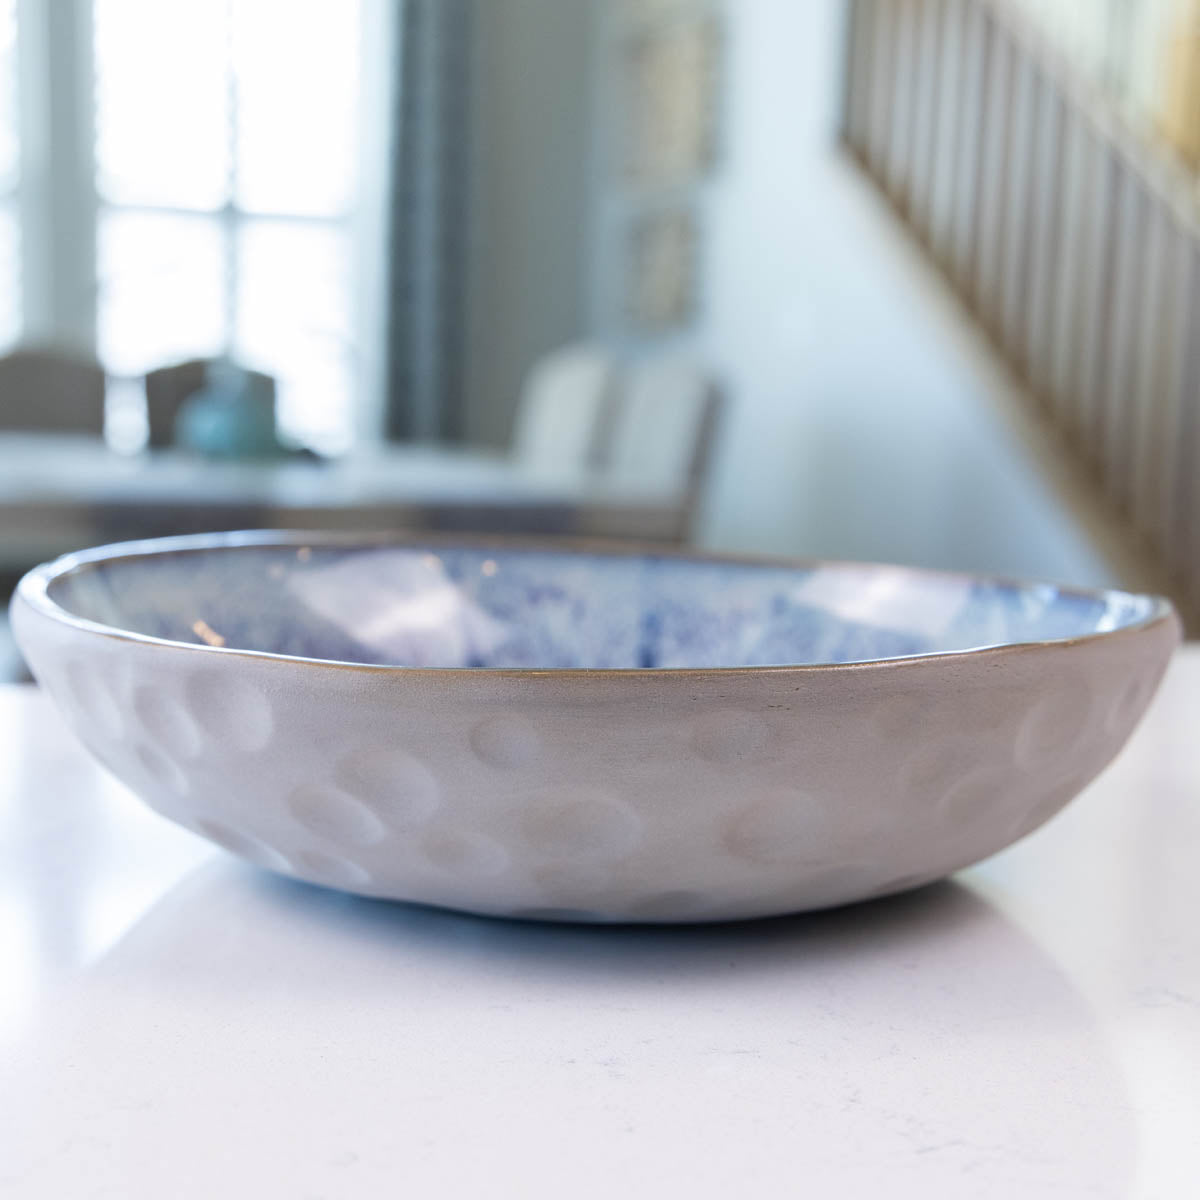 Large Gray Stoneware Serving/Decorative Bowl - Blues & Creams (Alchemy Collection)